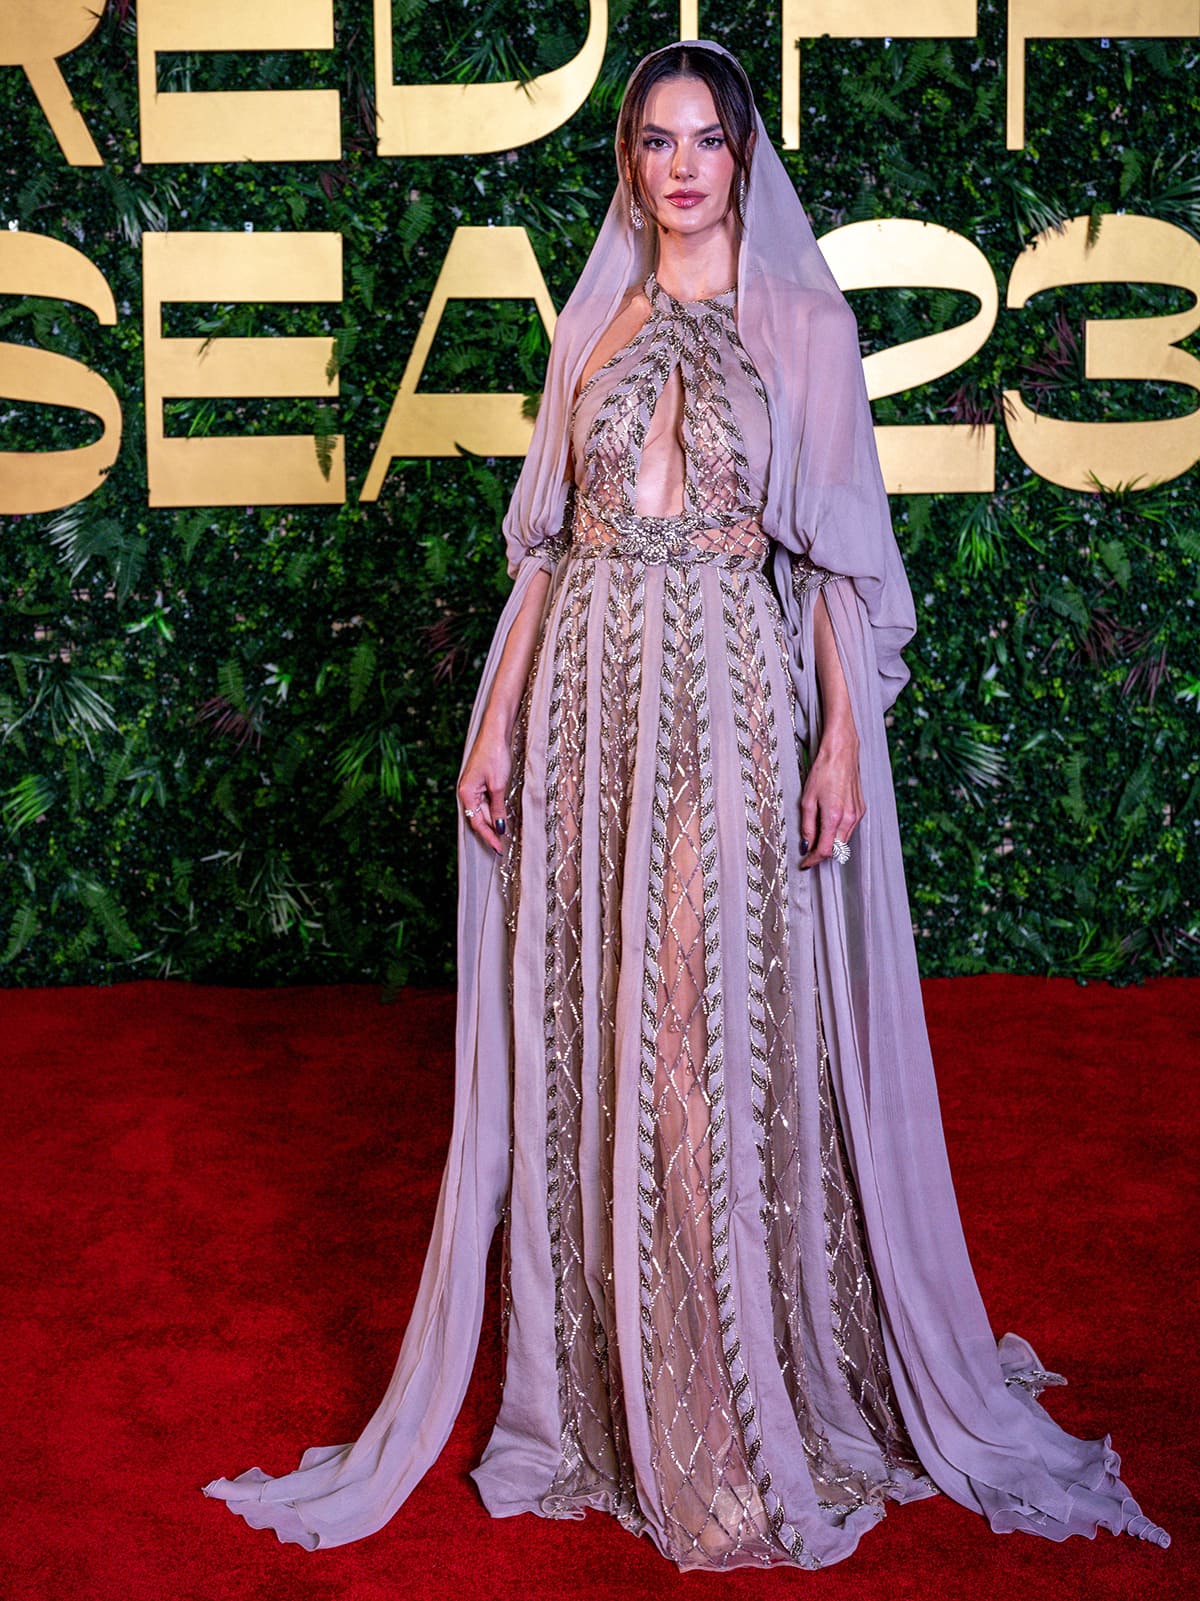 Alessandra Ambrosio is keeping the hooded gown hype train going by donning a sheer cutout gown by Elie Saab at the Red Sea Film Festival 2023